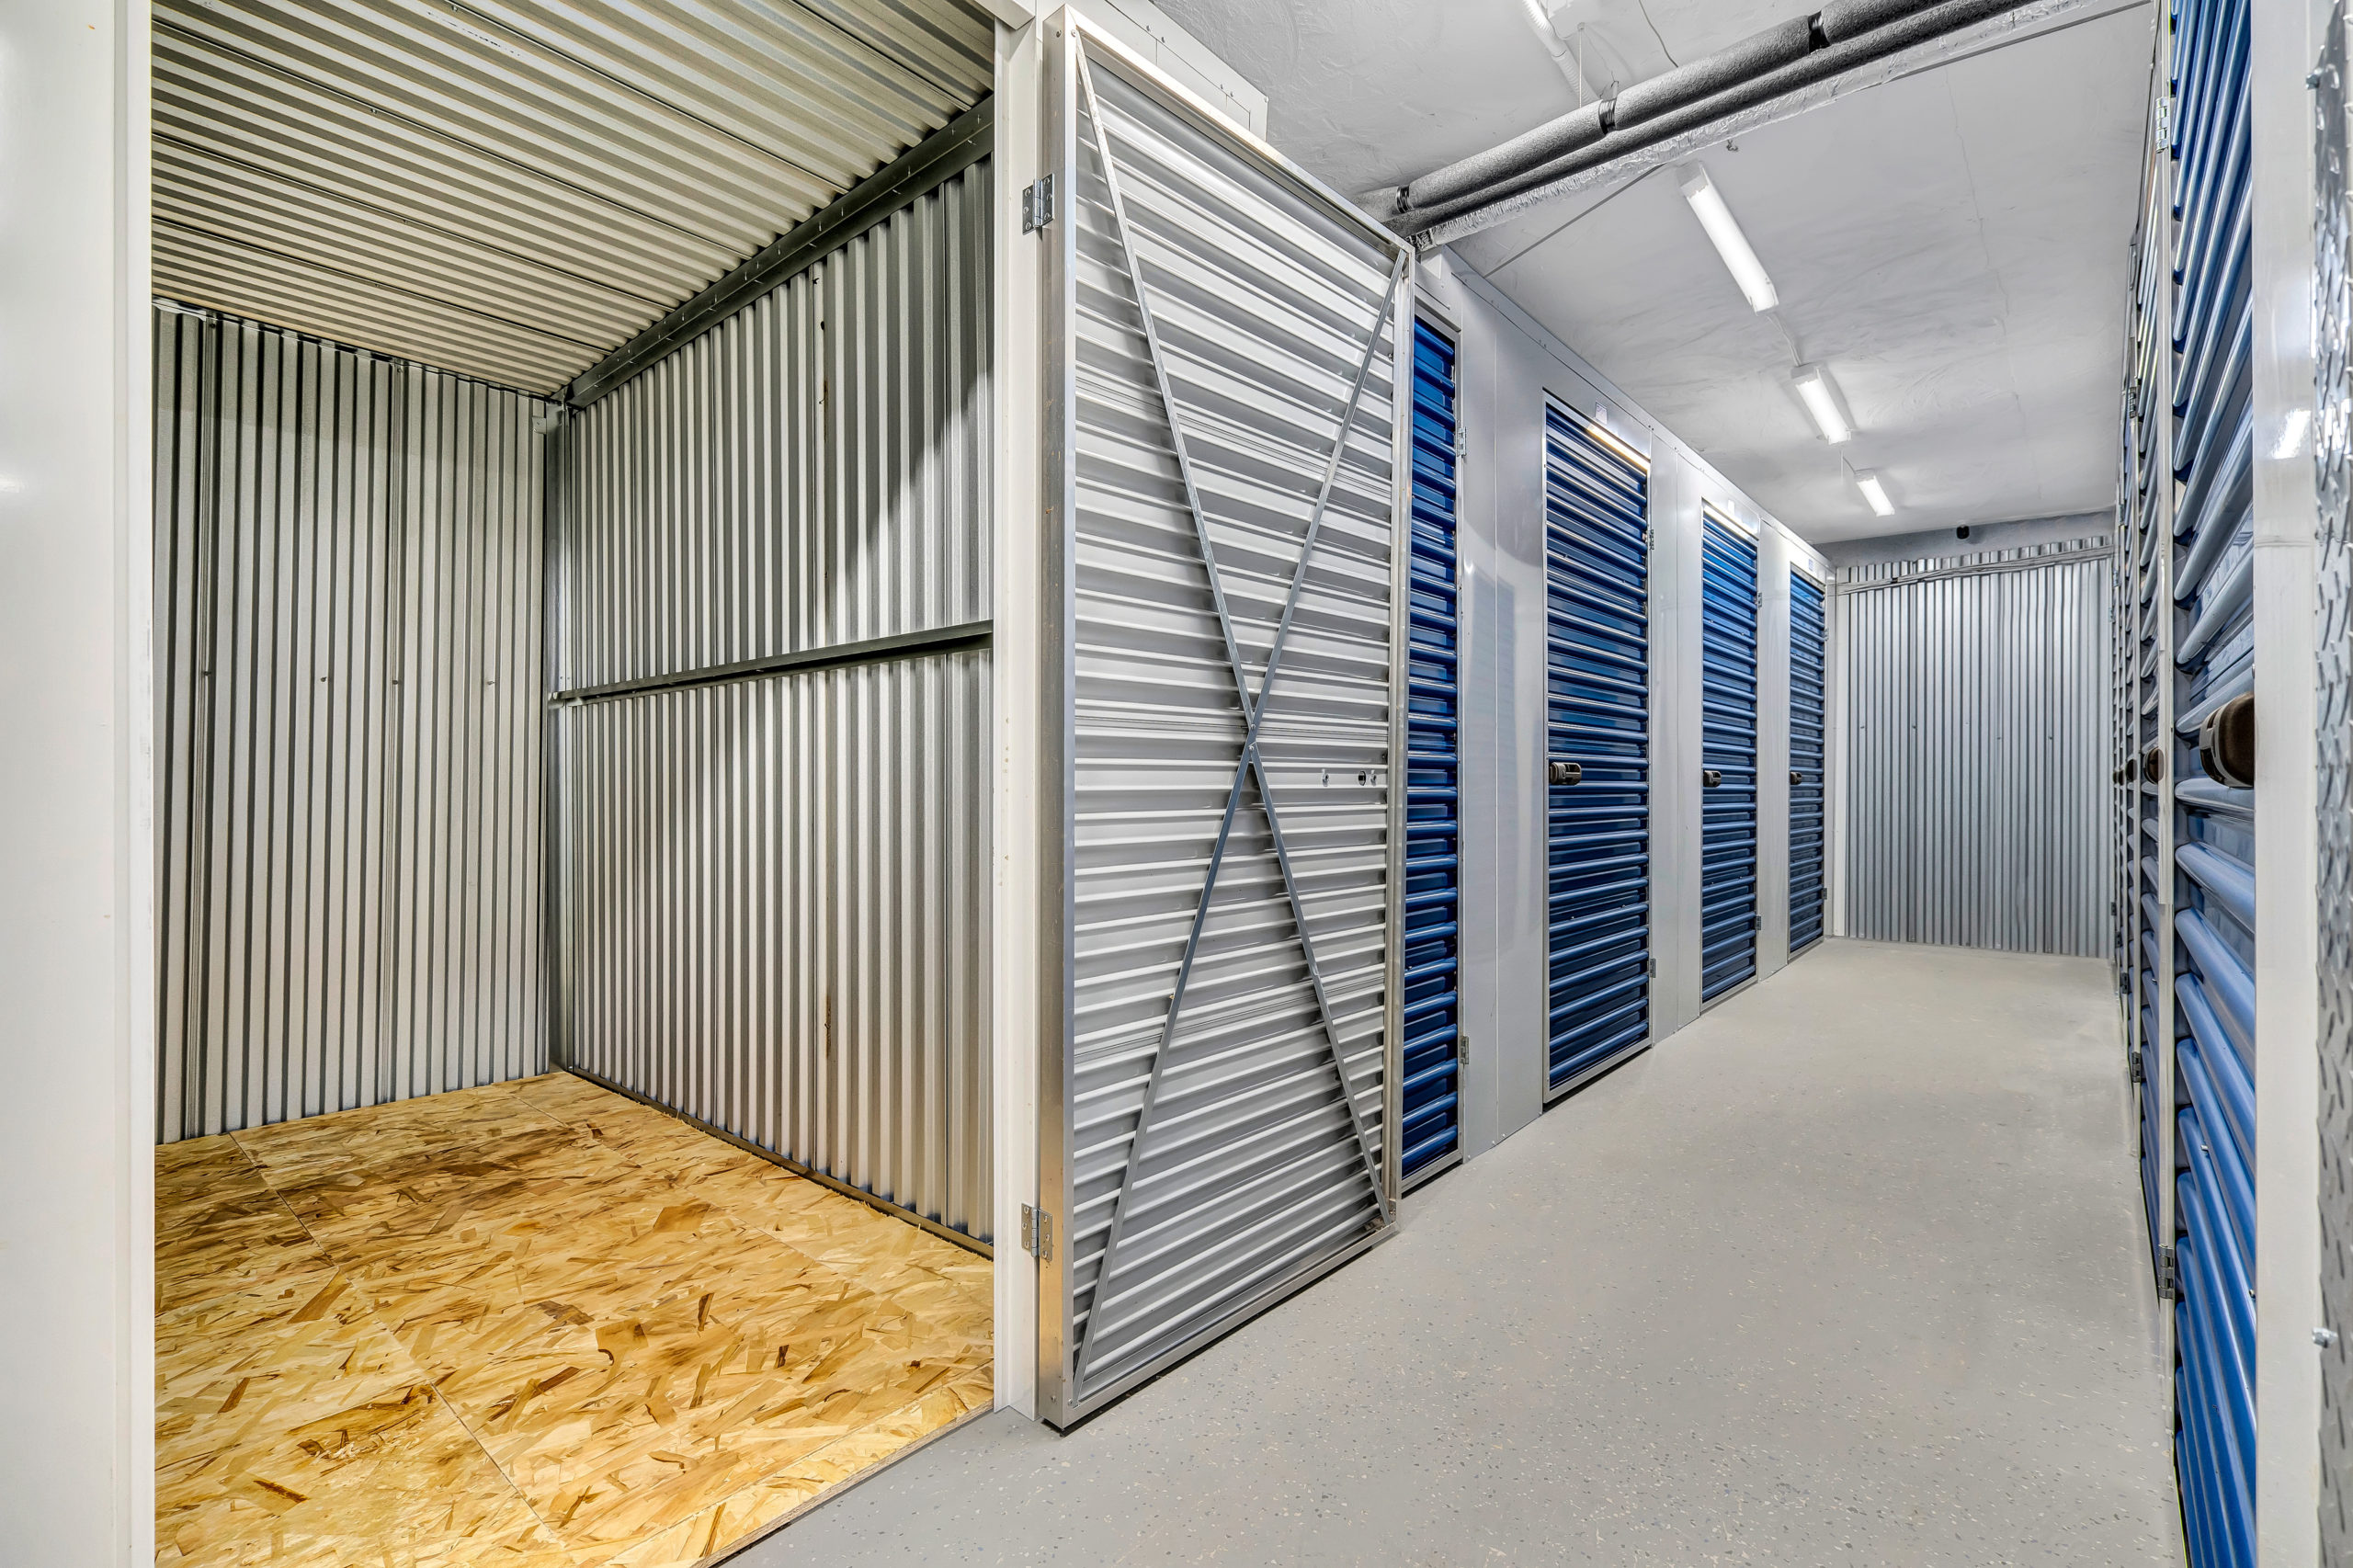 Tenant Storage Lockers: Are they Worth the Investment? - maxspace storage - on site storage solutions